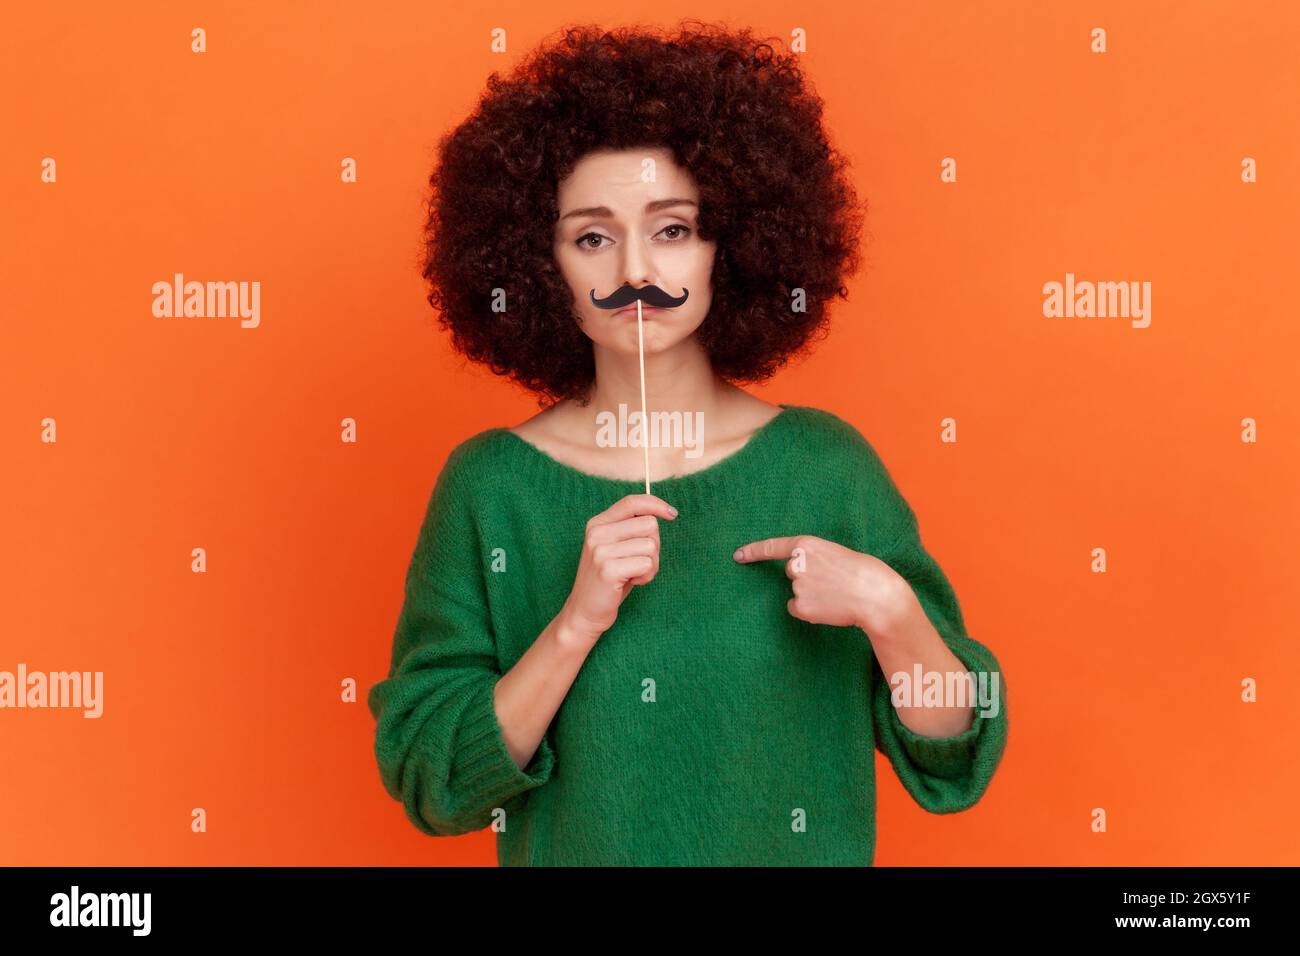 Portrait of funny serious woman with Afro hairstyle wearing green casual style sweater pointing at herself and holding paper mustache. Indoor studio shot isolated on orange background. Stock Photo